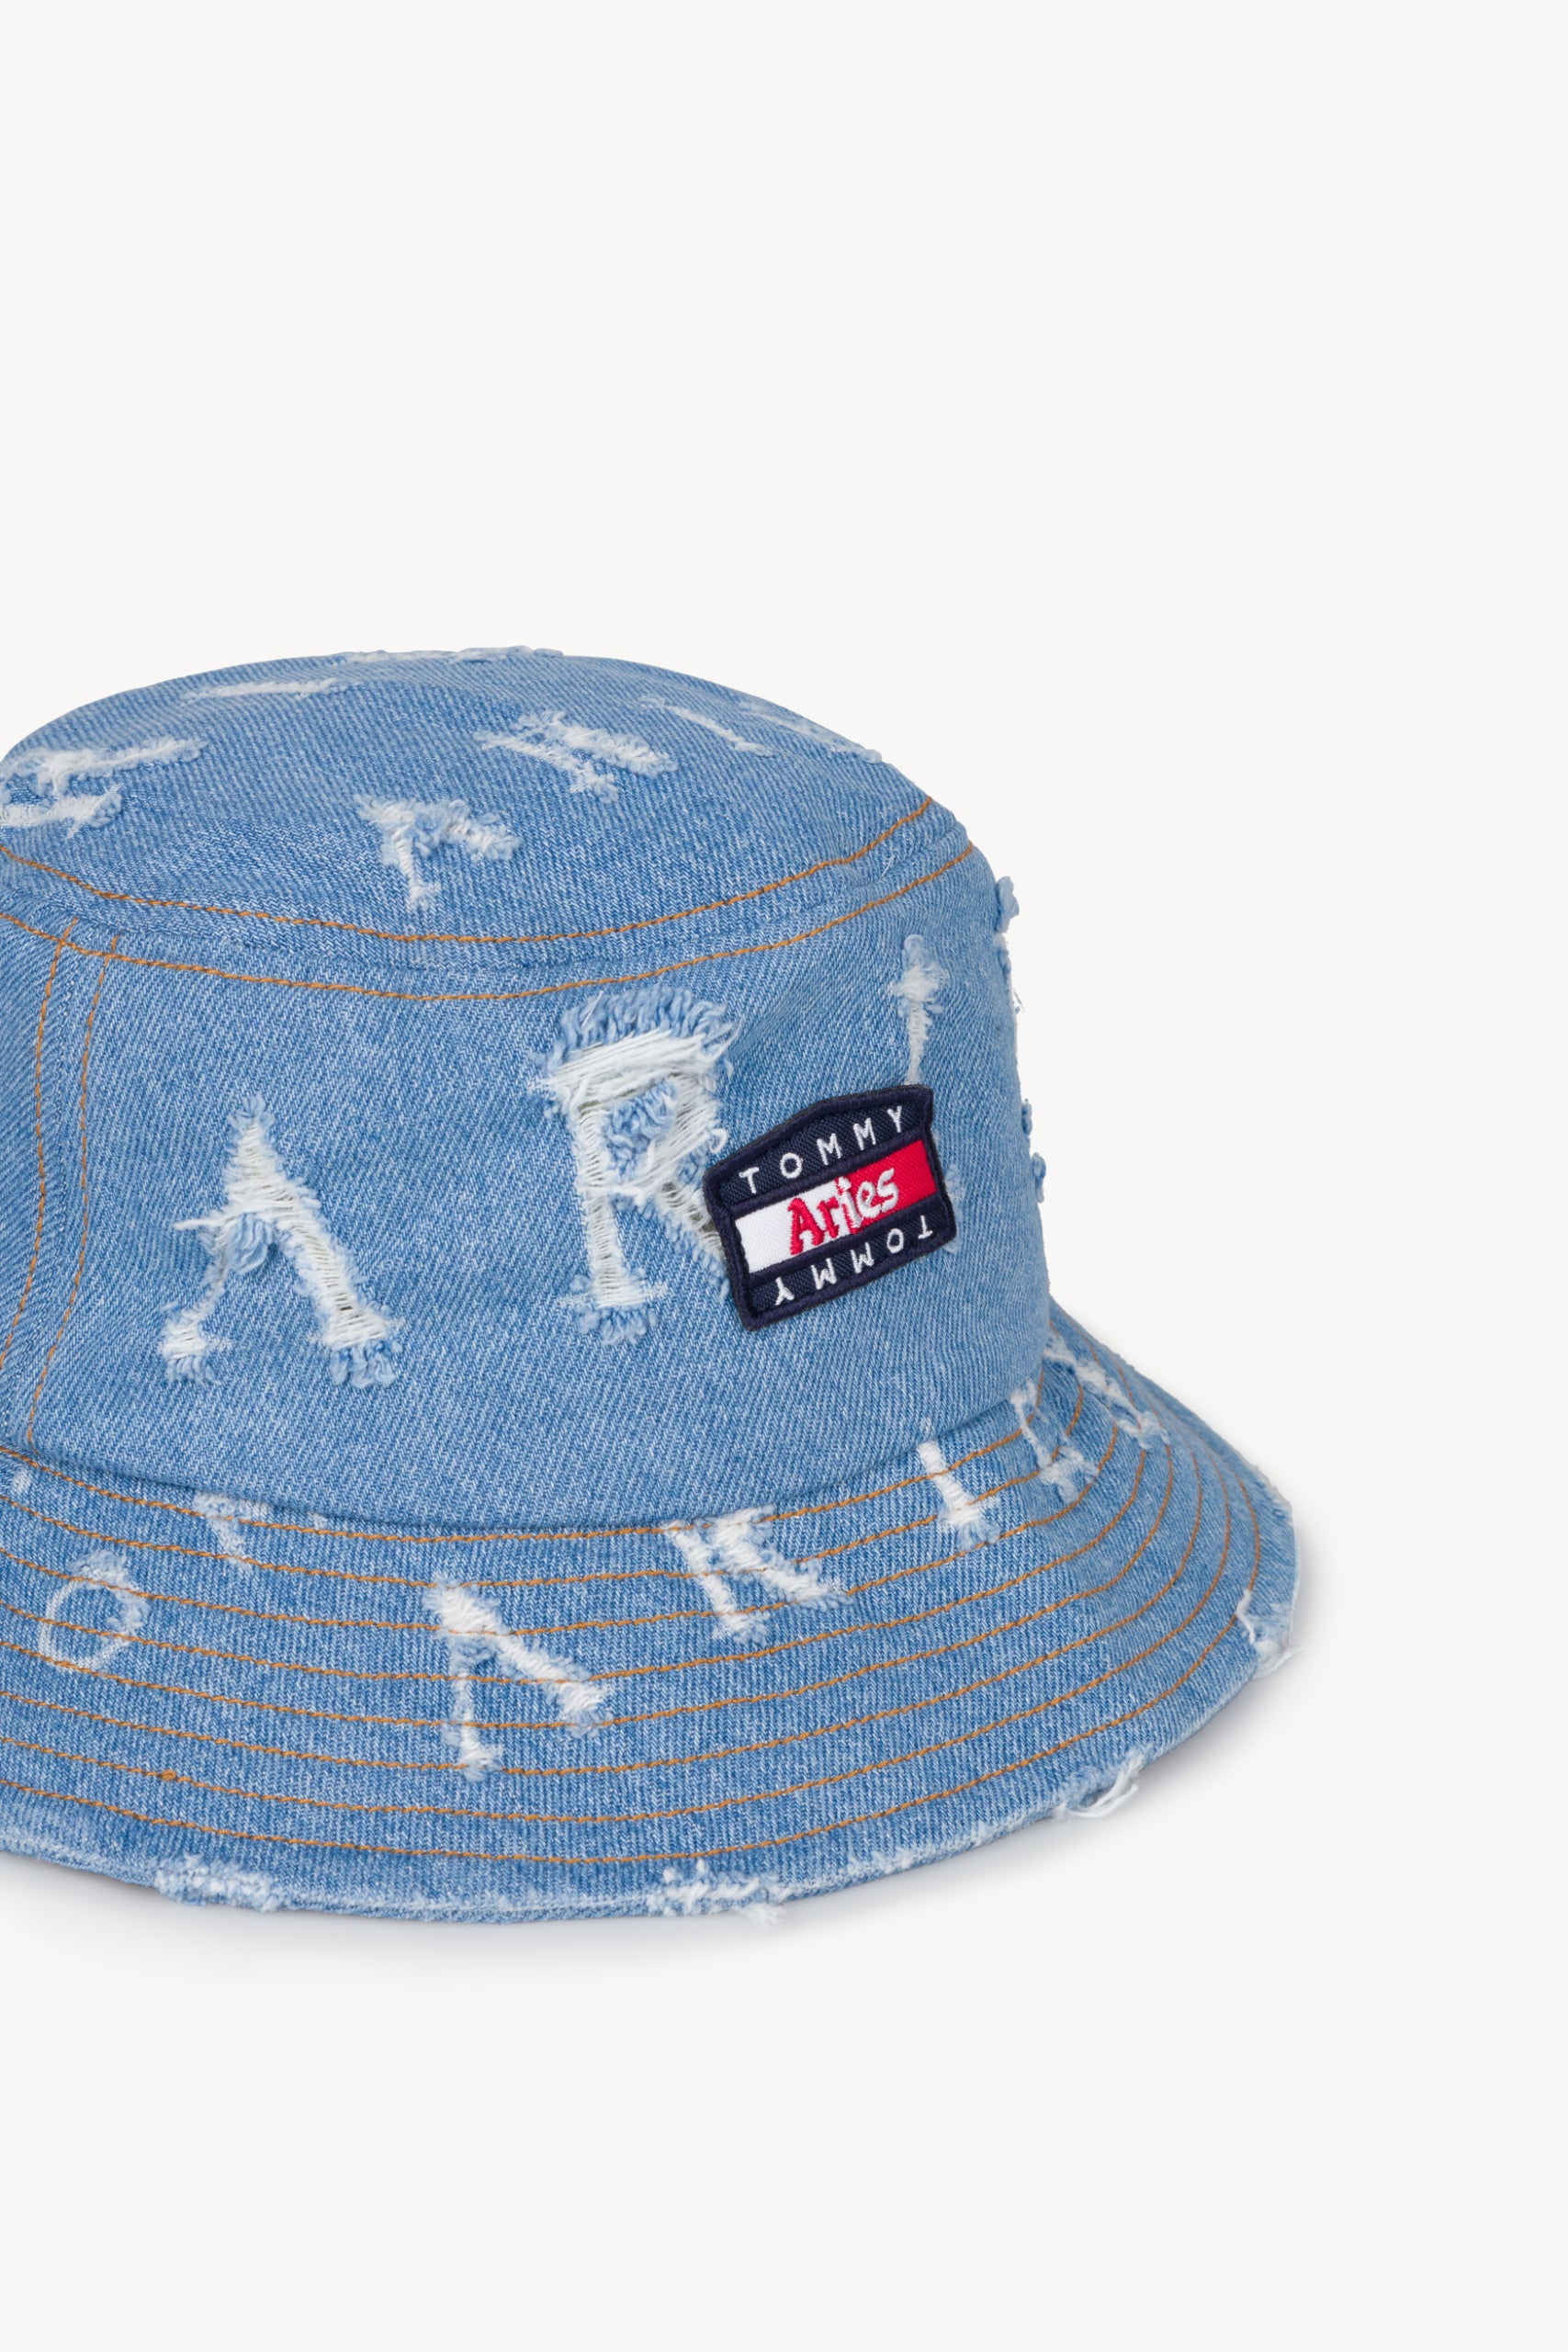 Load image into Gallery viewer, Tommy x Aries Logo Destroyed Denim Hat